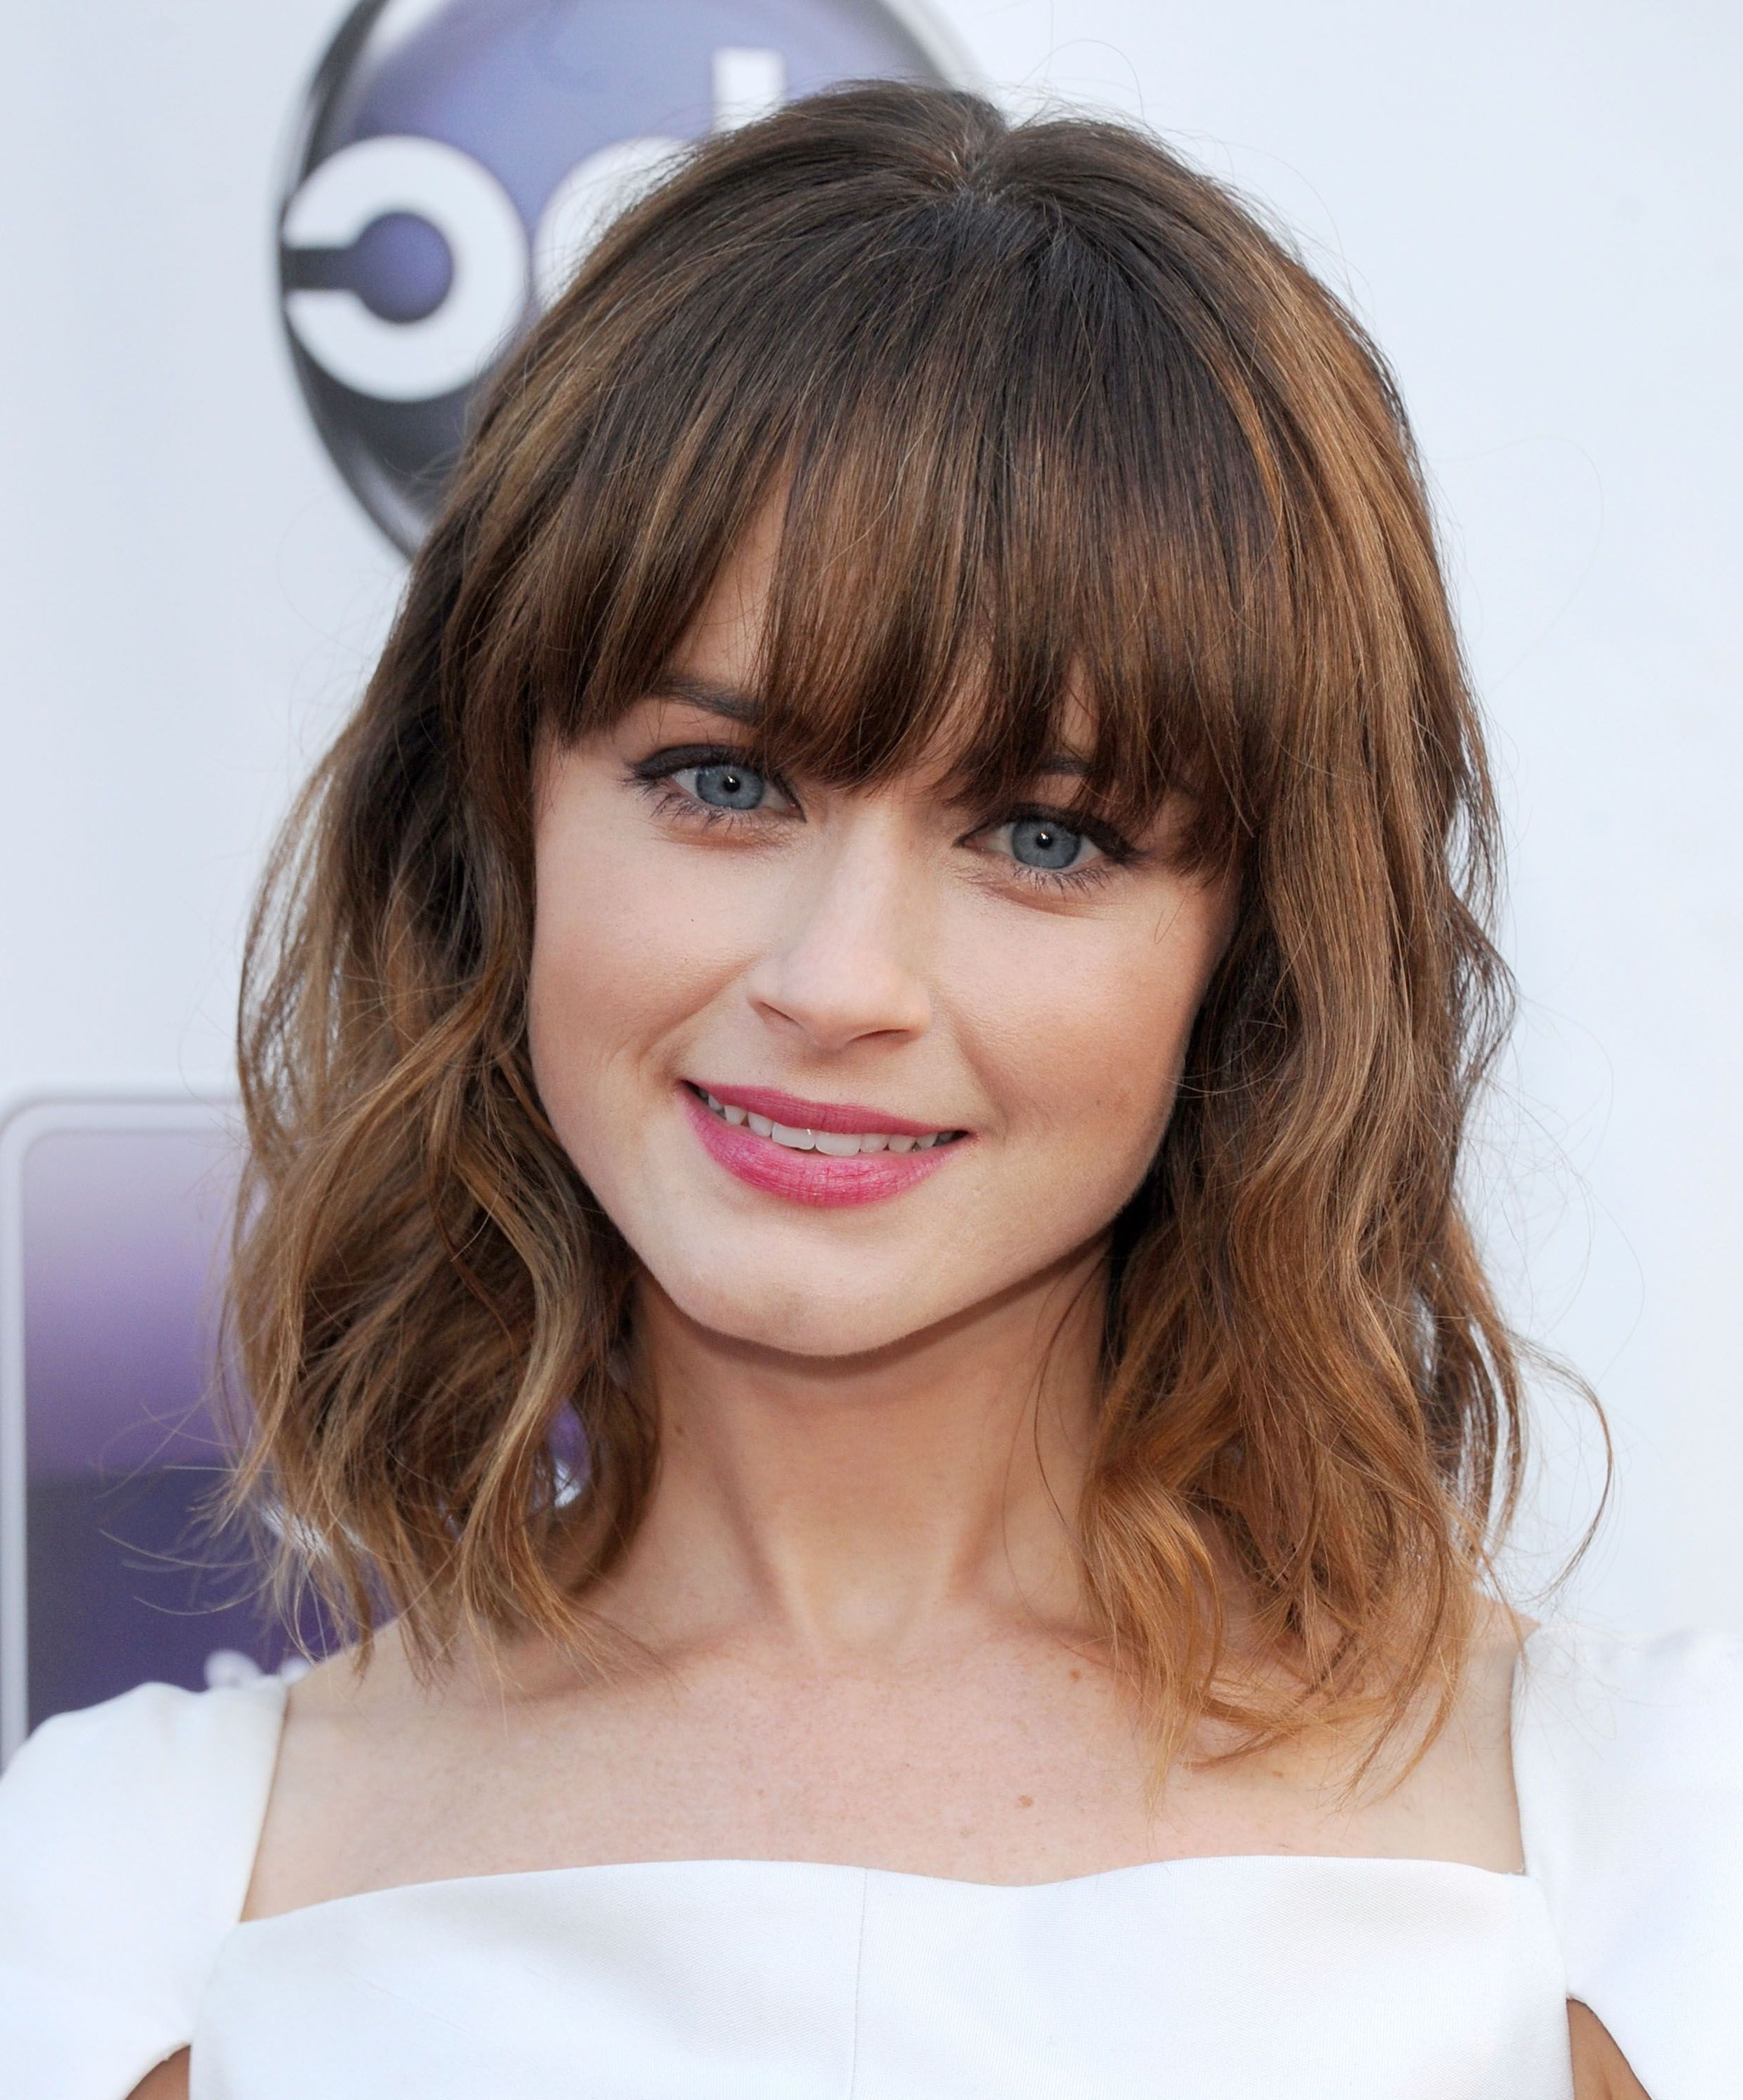 35 Best Hairstyles With Bangs – Photos Of Celebrity Haircuts With Bangs Inside Most Current Medium Hairstyles Without Fringe (View 8 of 20)